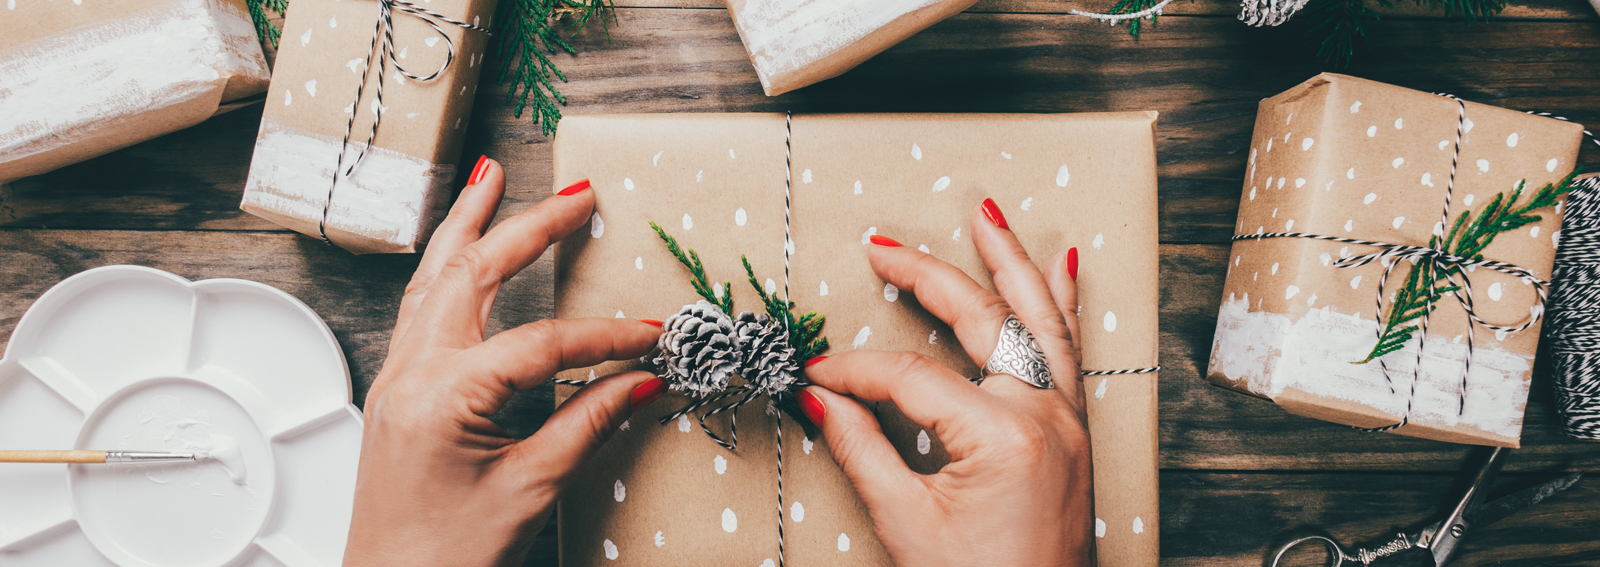 Woman wrapping Christmas presents in a crafty way